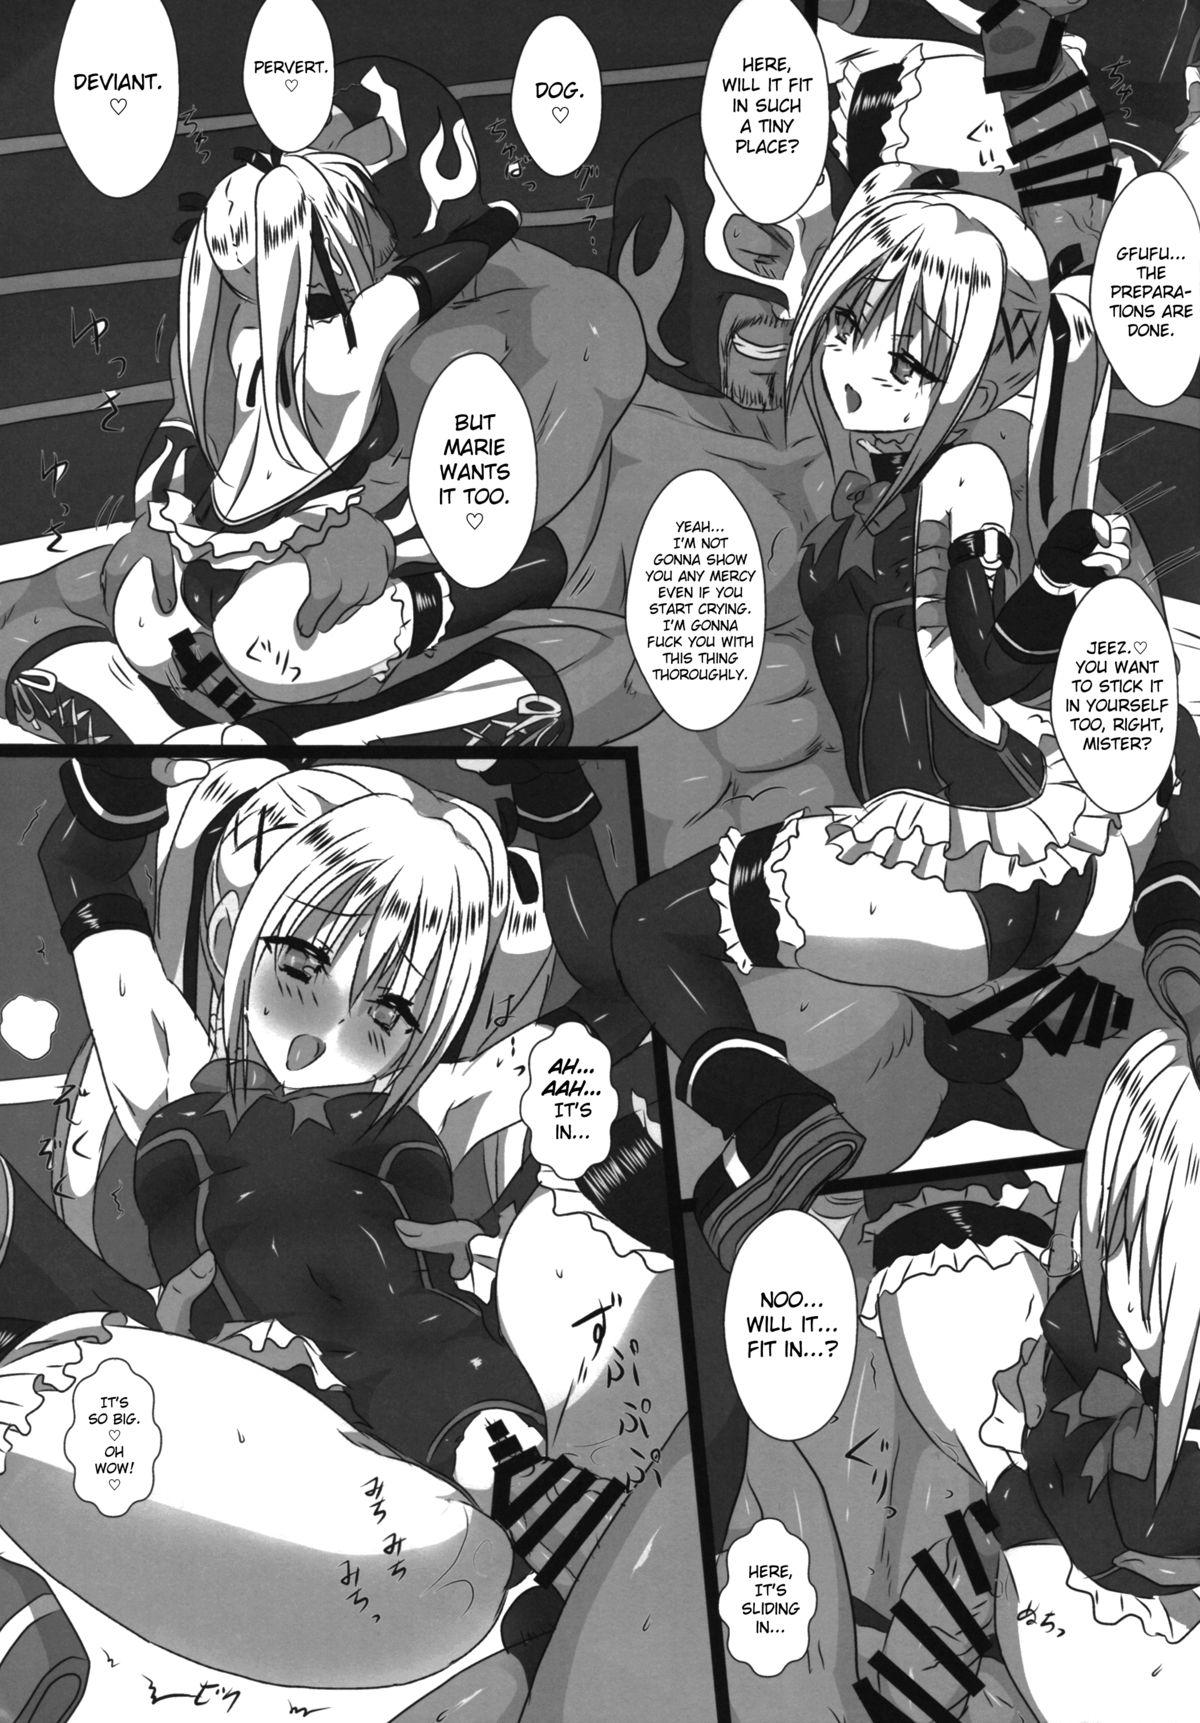 Penetration Koko de Shitai no ne...? | This is where you want to do it, right...? - Dead or alive Gordinha - Page 10